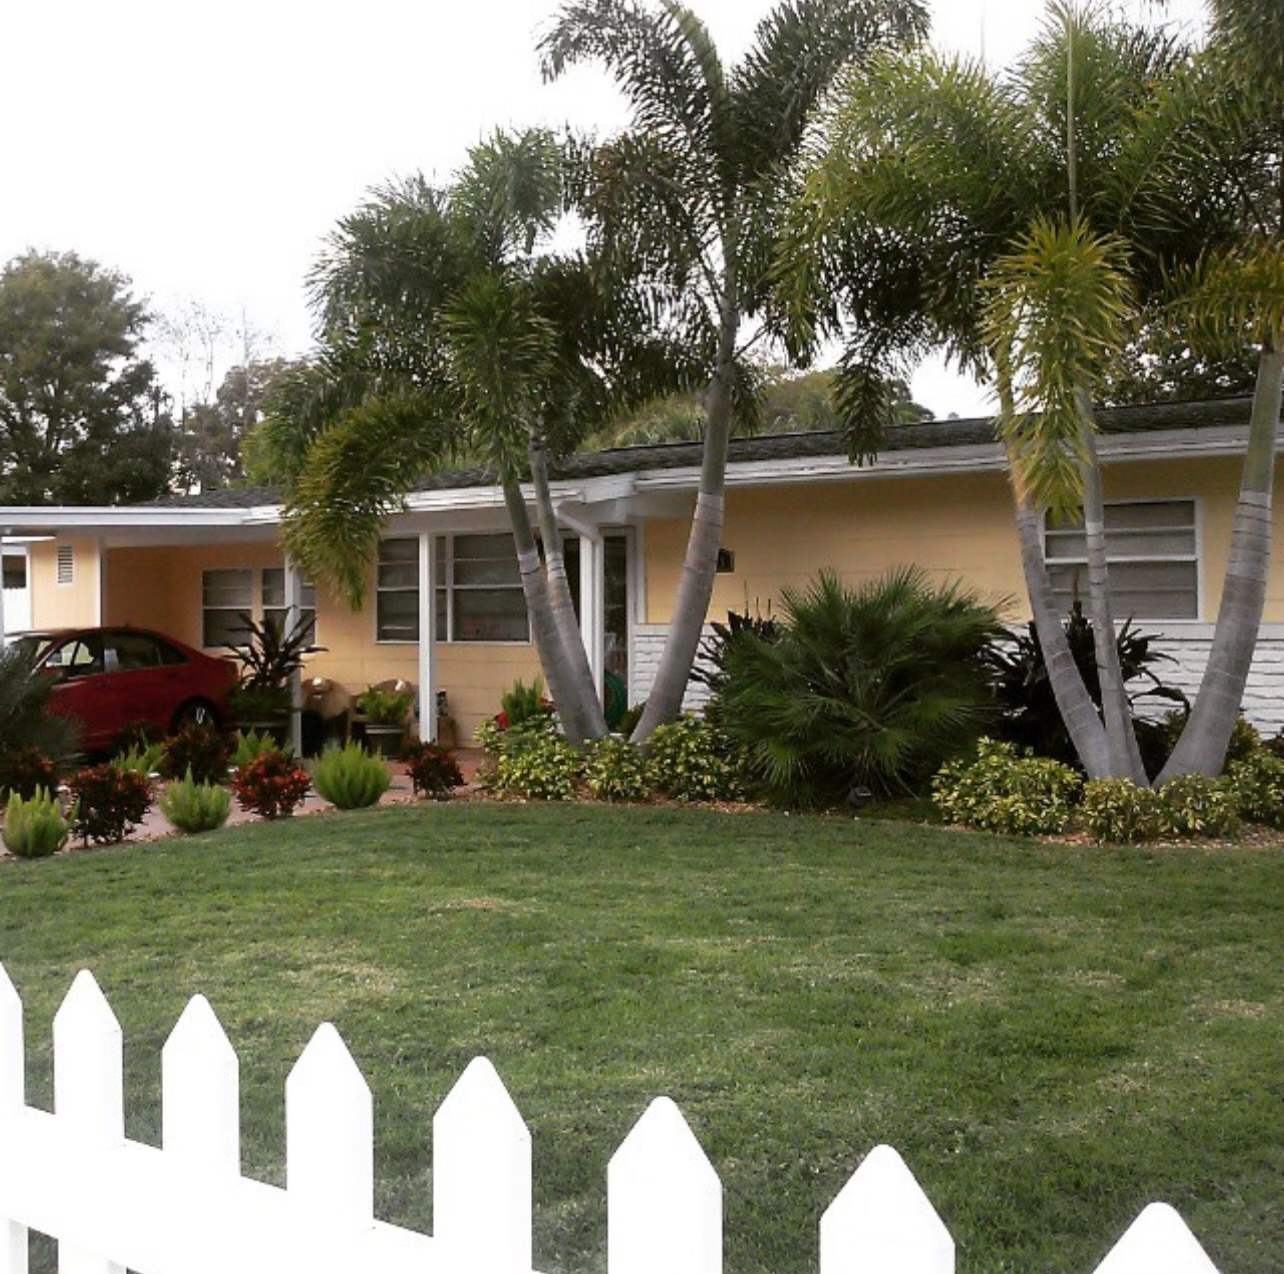 Grass cutting services Tampa Bay